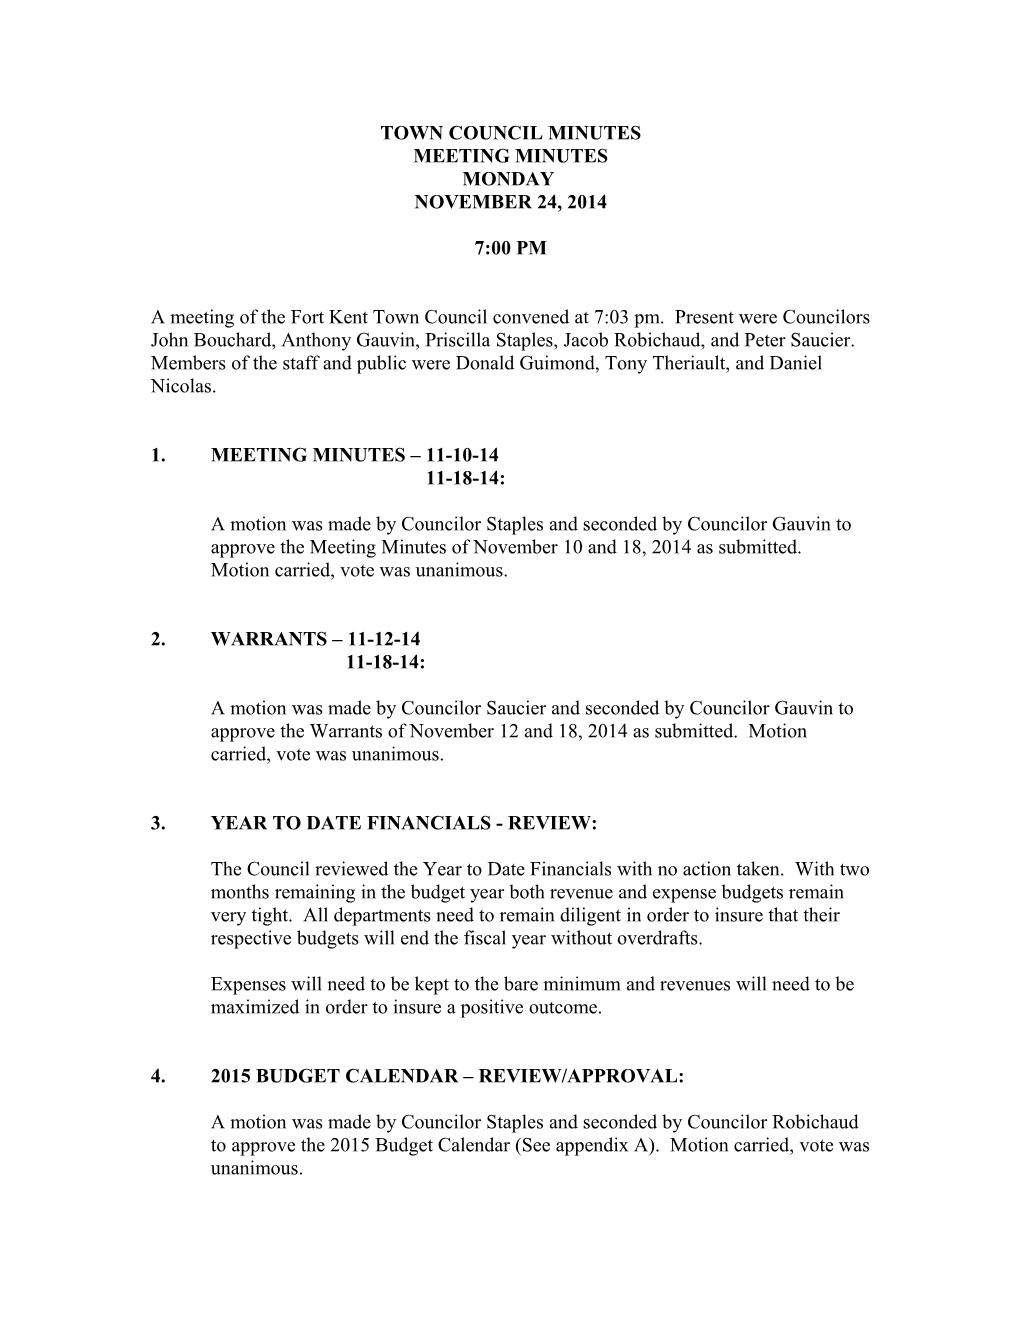 Town Council Minutes s2